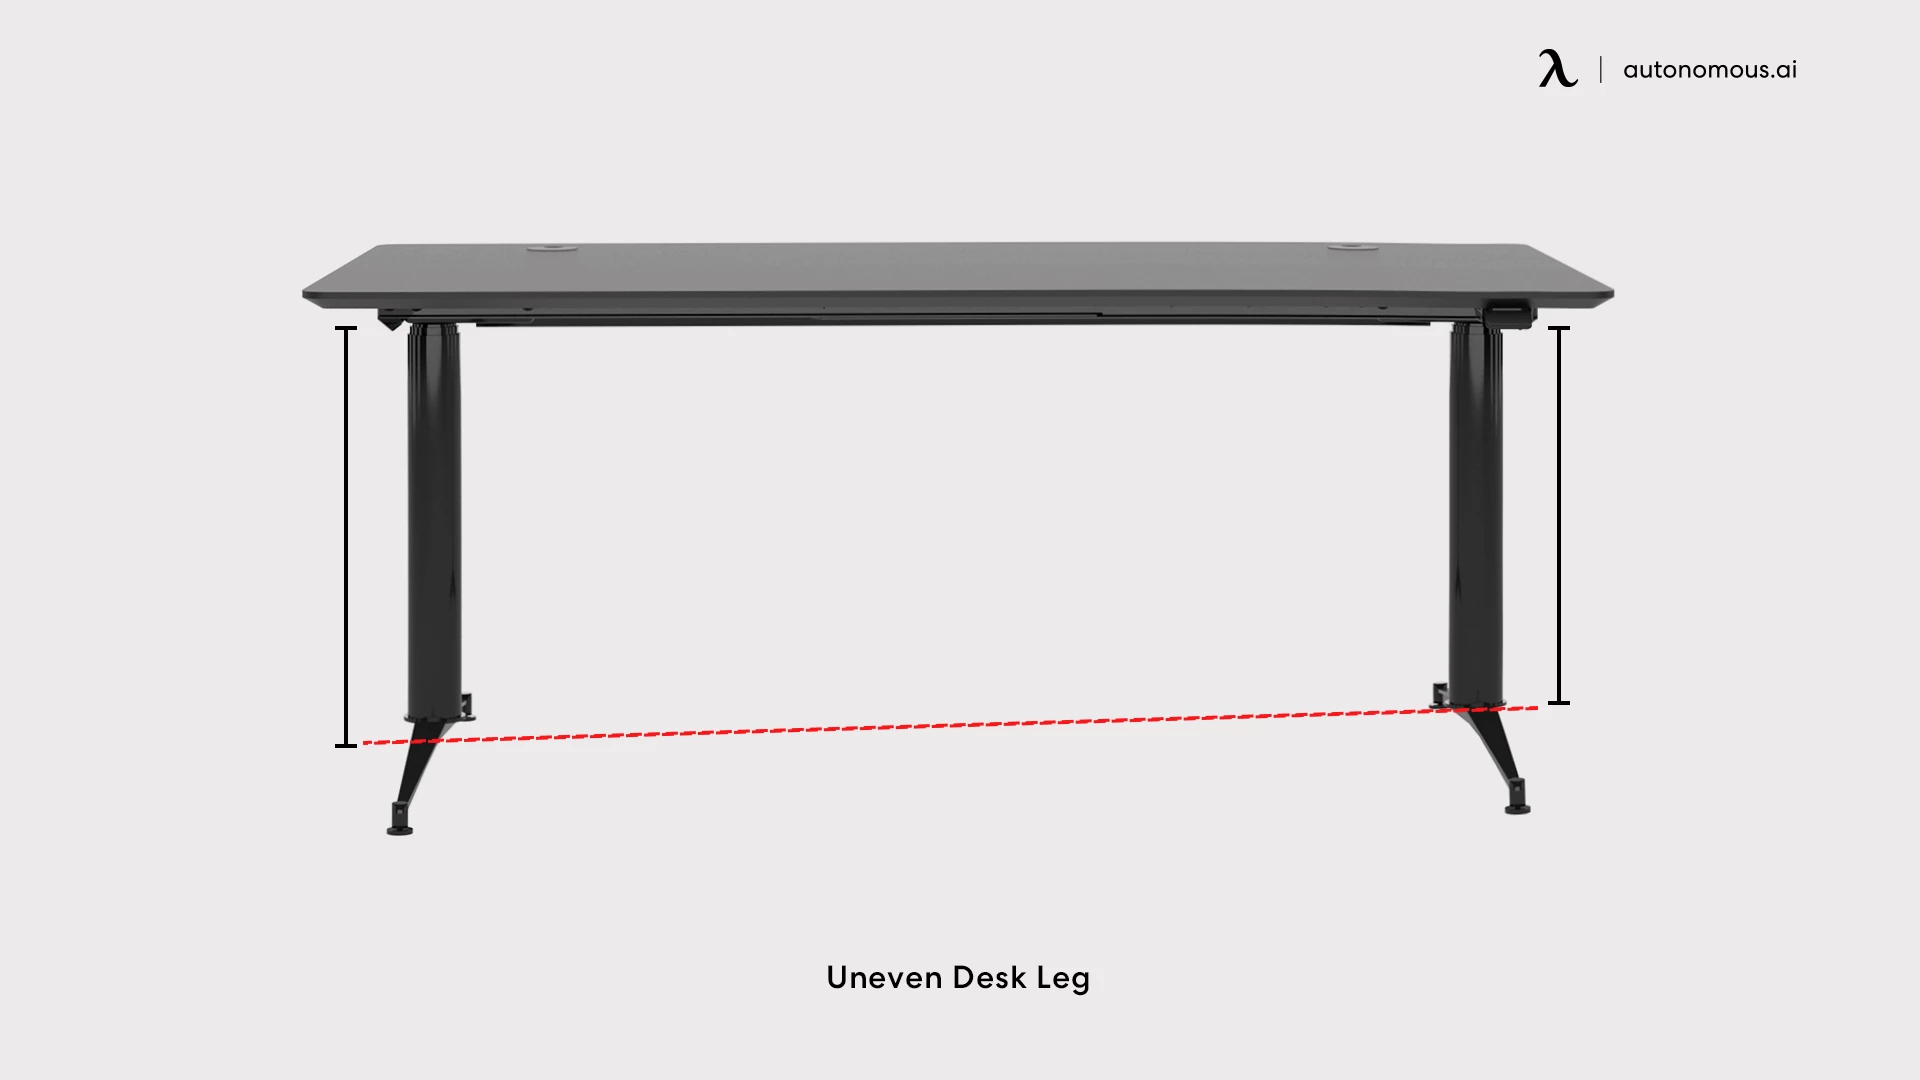 The legs on your desk aren't almost the same height